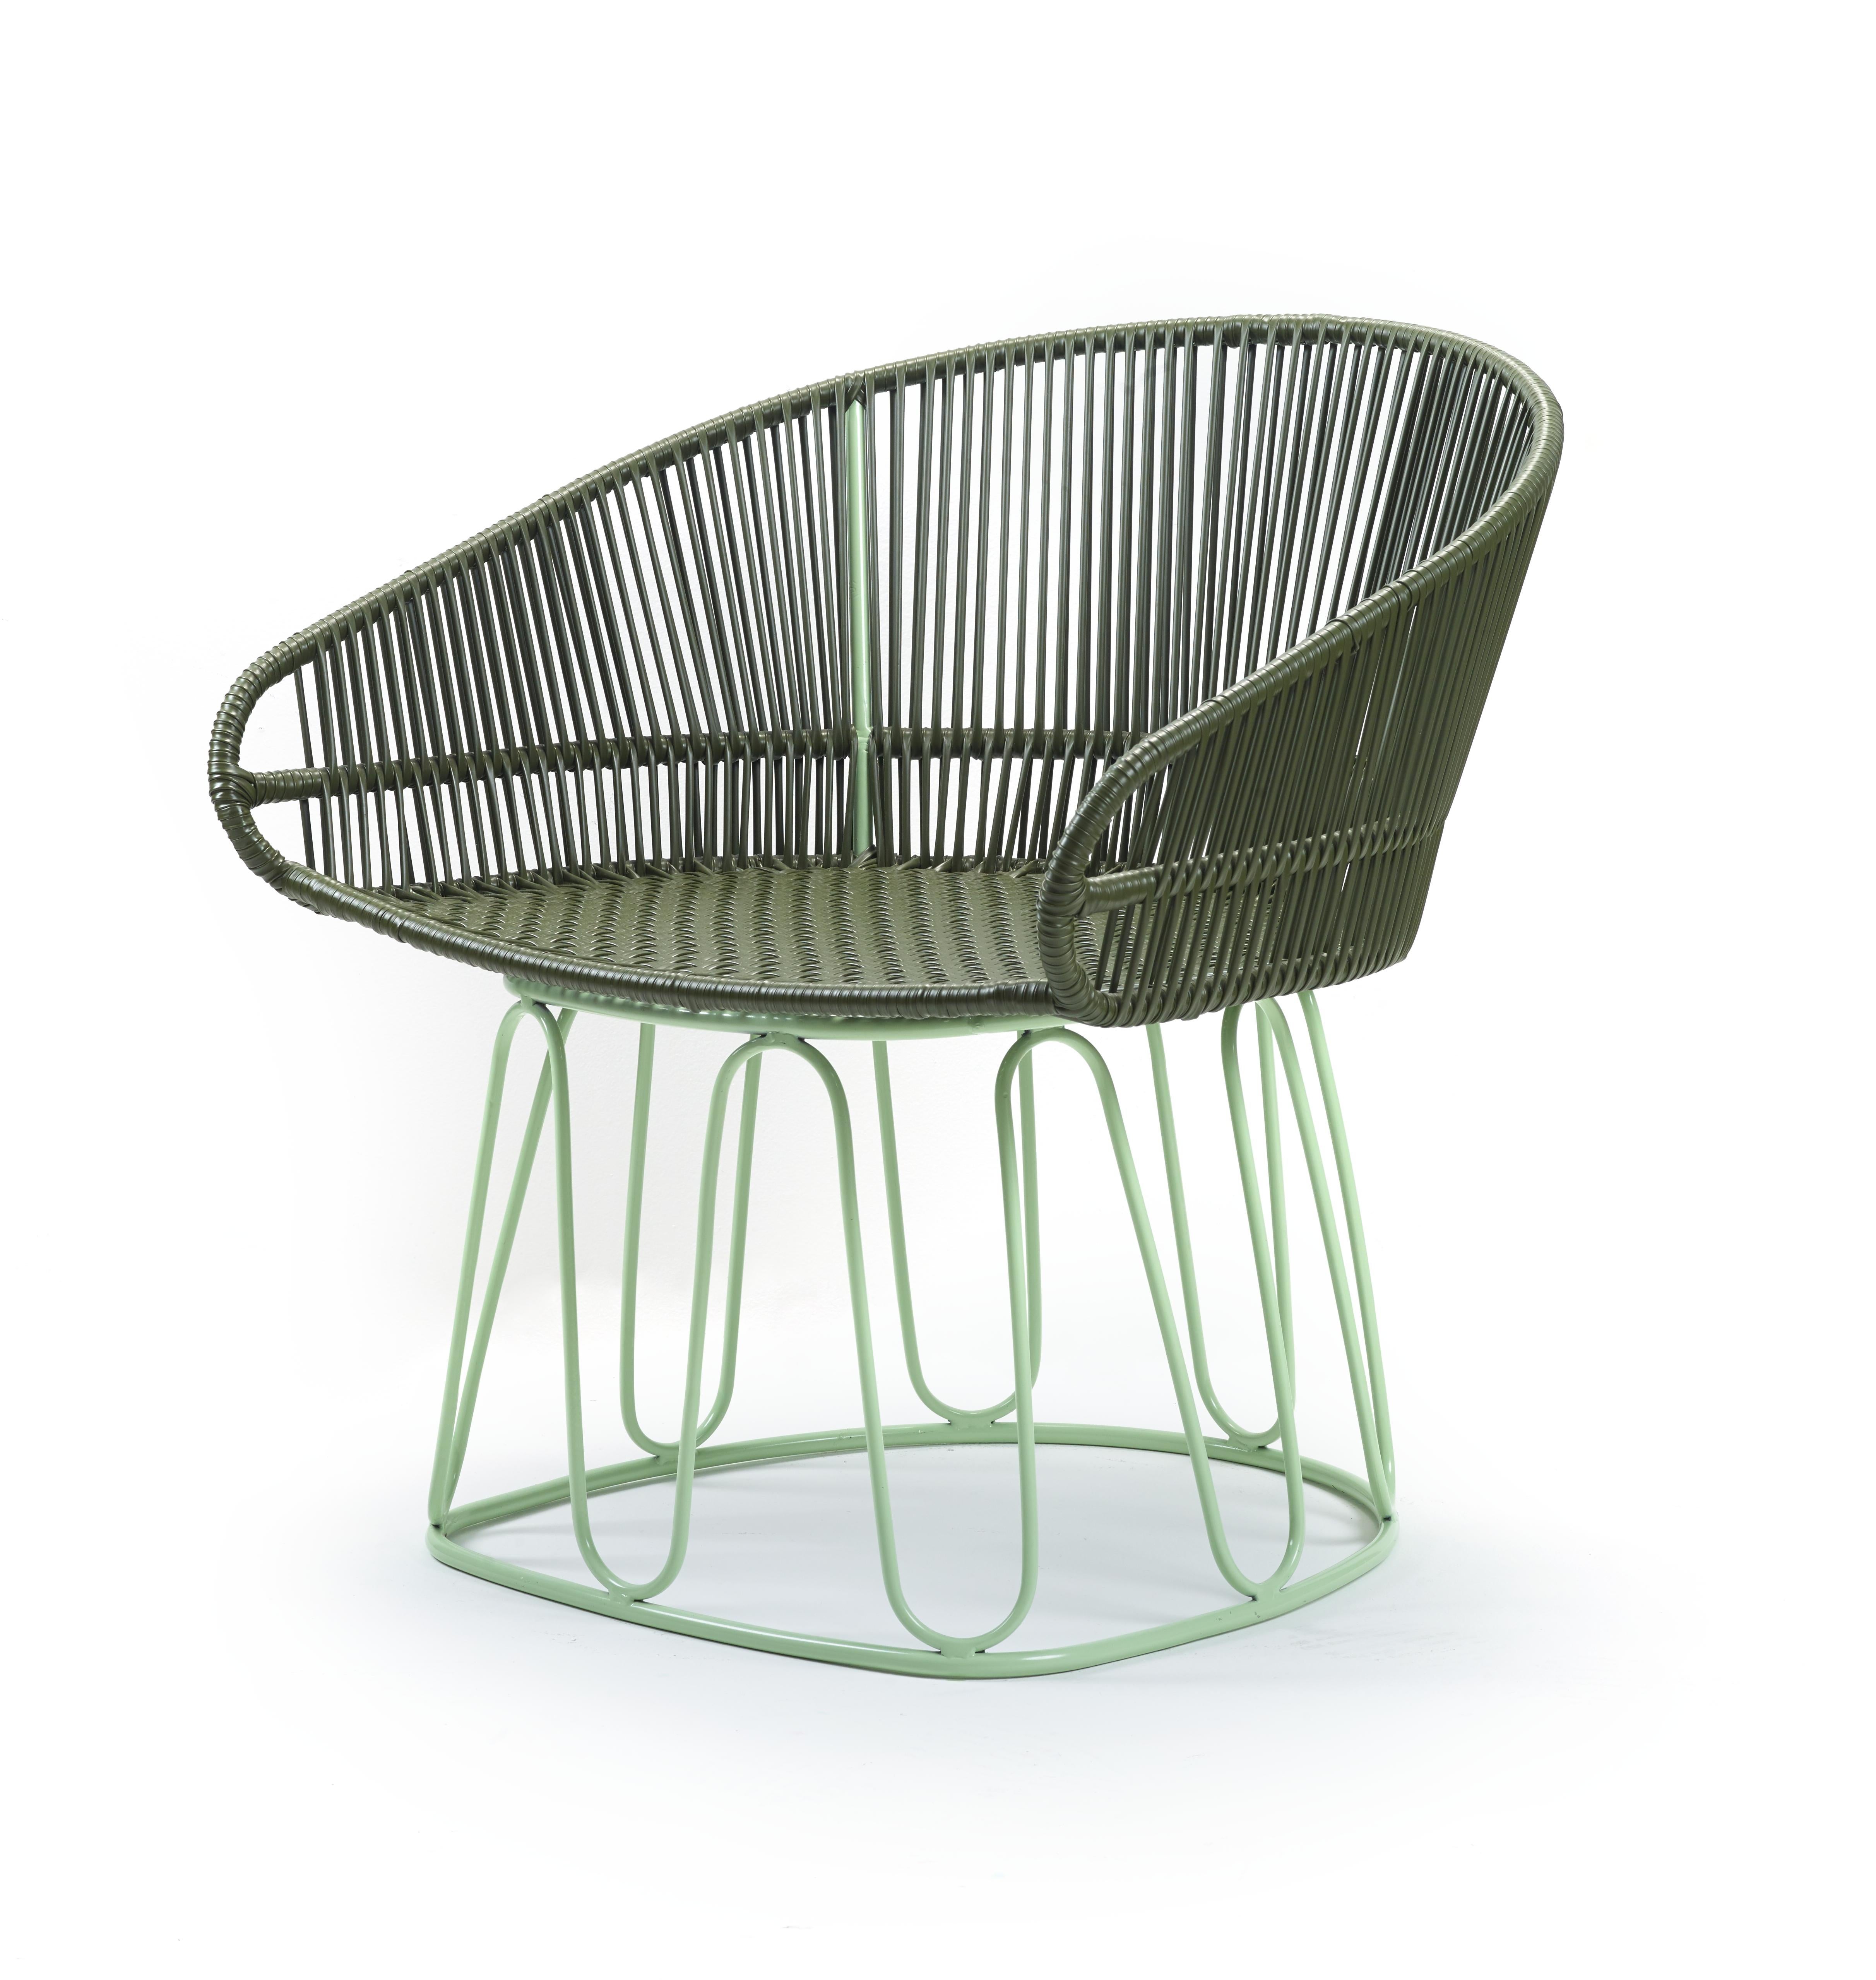 Olive circo lounge chair by Sebastian Herkner
Materials: Galvanized and powder-coated tubular steel. PVC strings.
Technique: Made from recycled plastic. Weaved by local craftspeople in Colombia. 
Dimensions: W 74 x D 66.2 x H 73 cm 
Available in